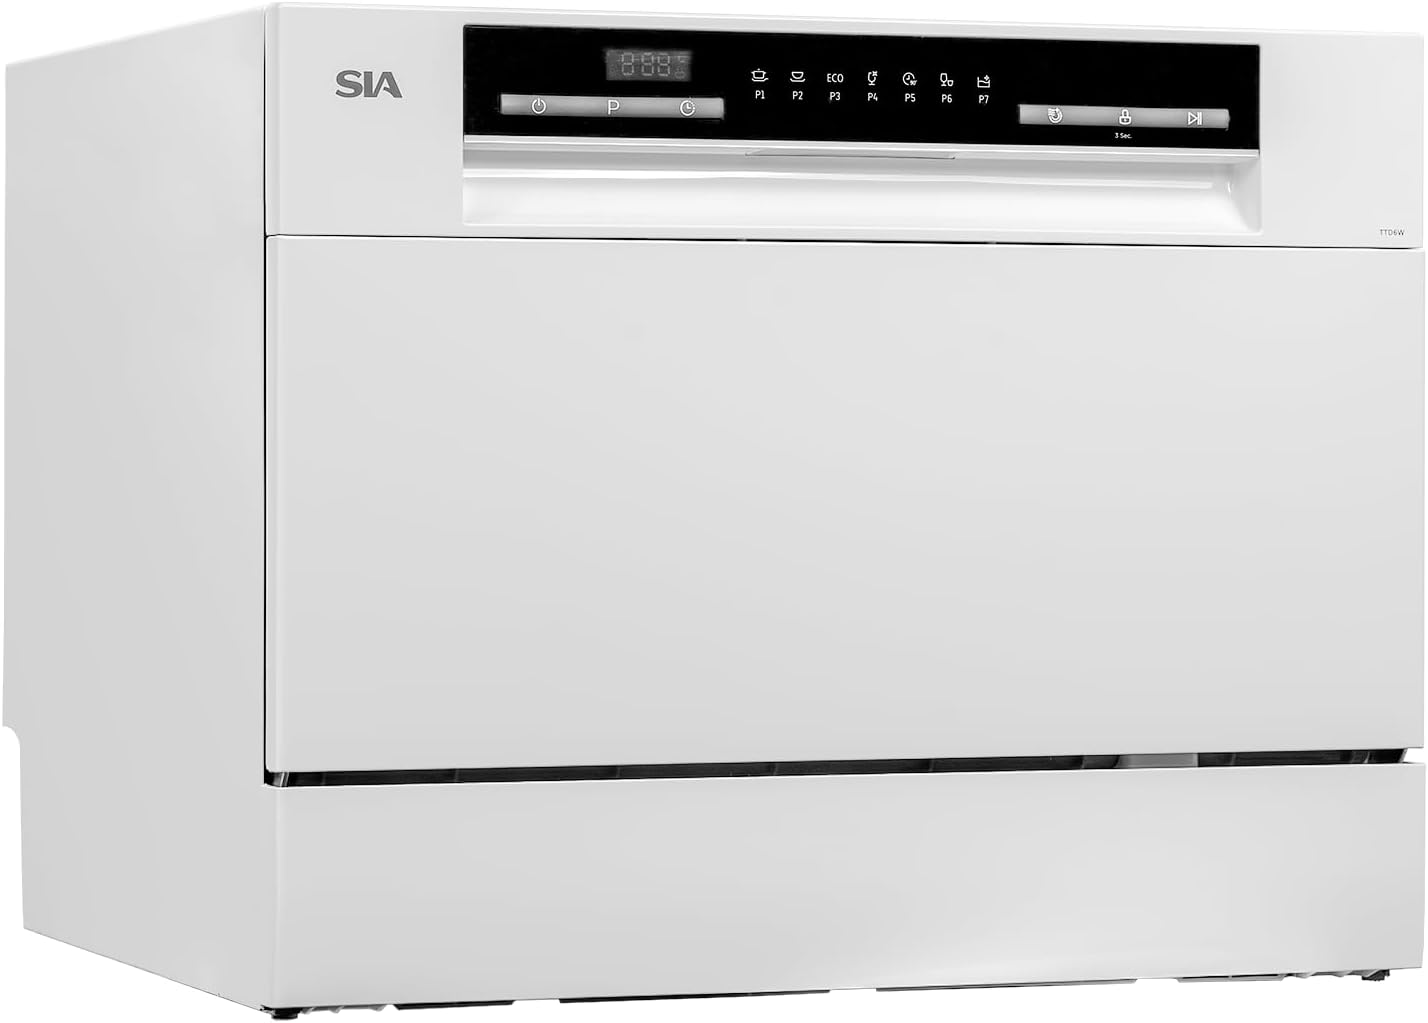 Table Top Dishwasher In White, 6 Places 6 Programmes LED Display 24 Hour Delay Start W55 x D50 x H43.8cm - SIA TTD6W - Amazing Gadgets Outlet